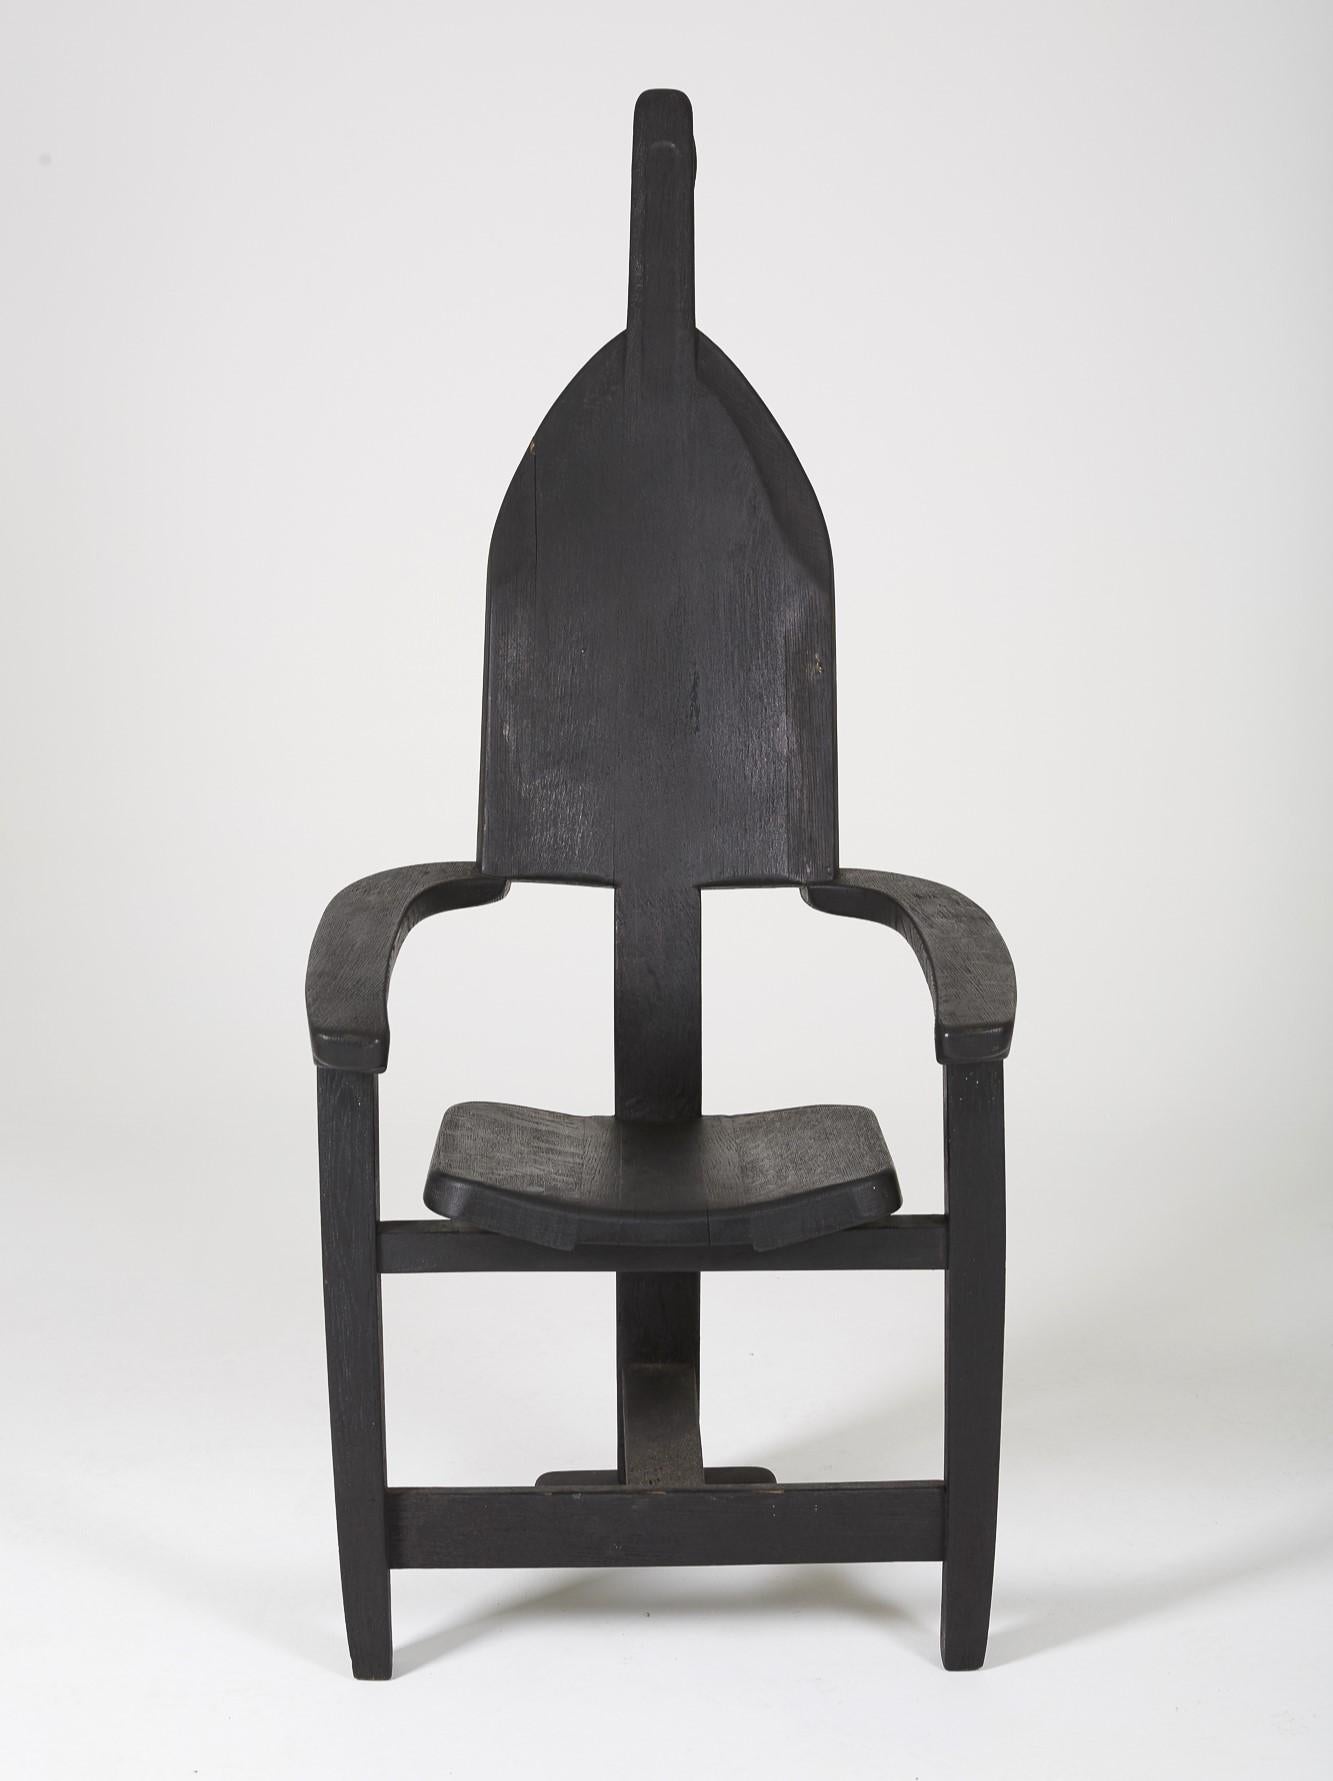 Black-stained solid wood throne chair by designer Rudi Muth, 1987. Signed and dated by hand under the seat. Good condition, slight traces of wear.
LP394